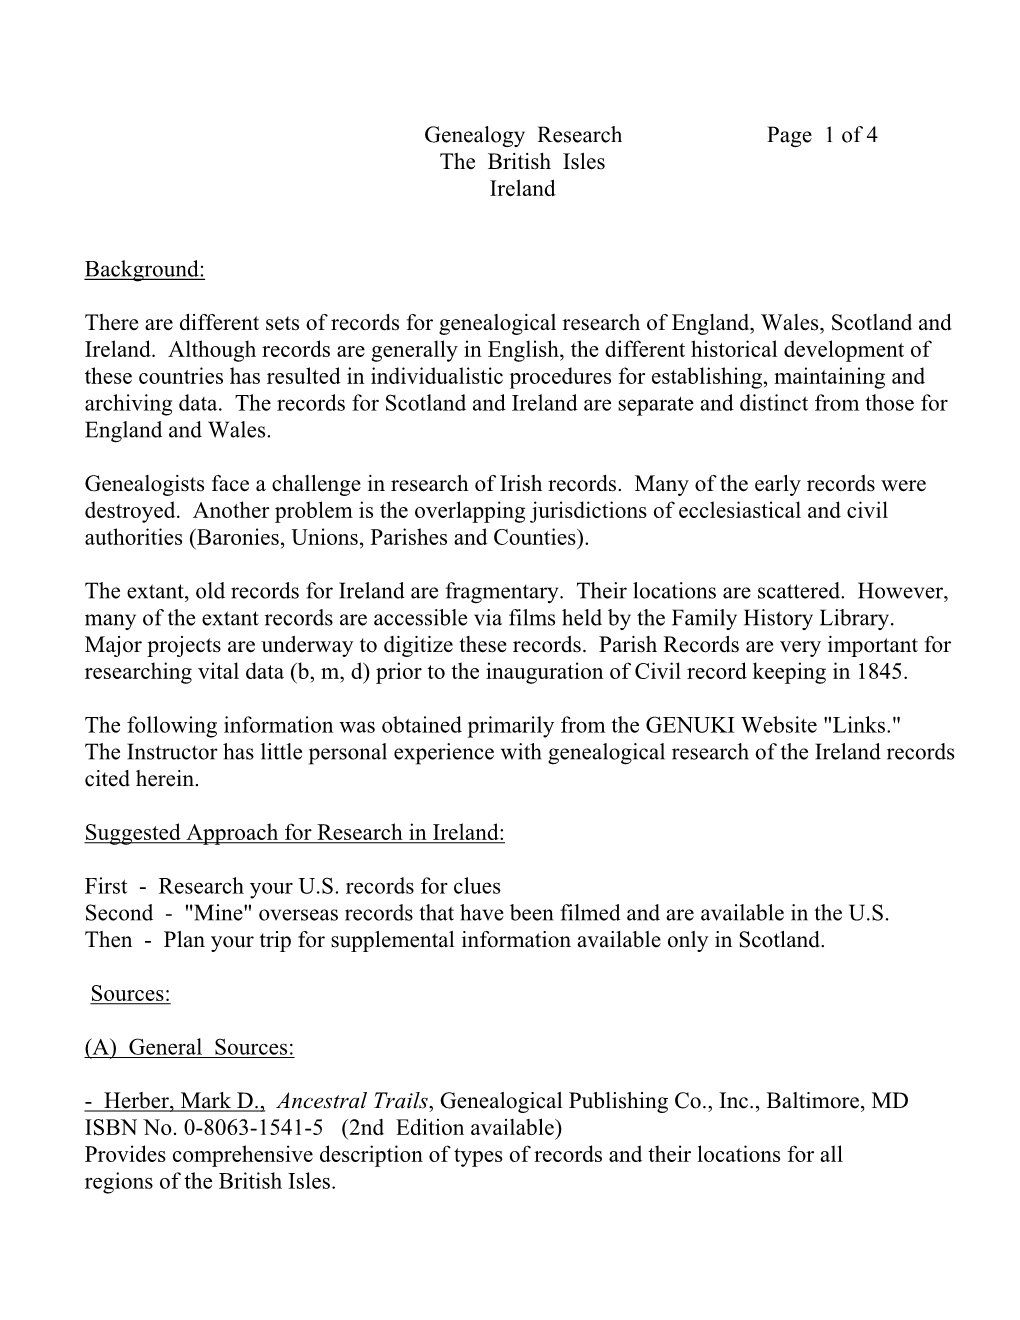 Genealogy Research Page 1 of 4 the British Isles Ireland Background